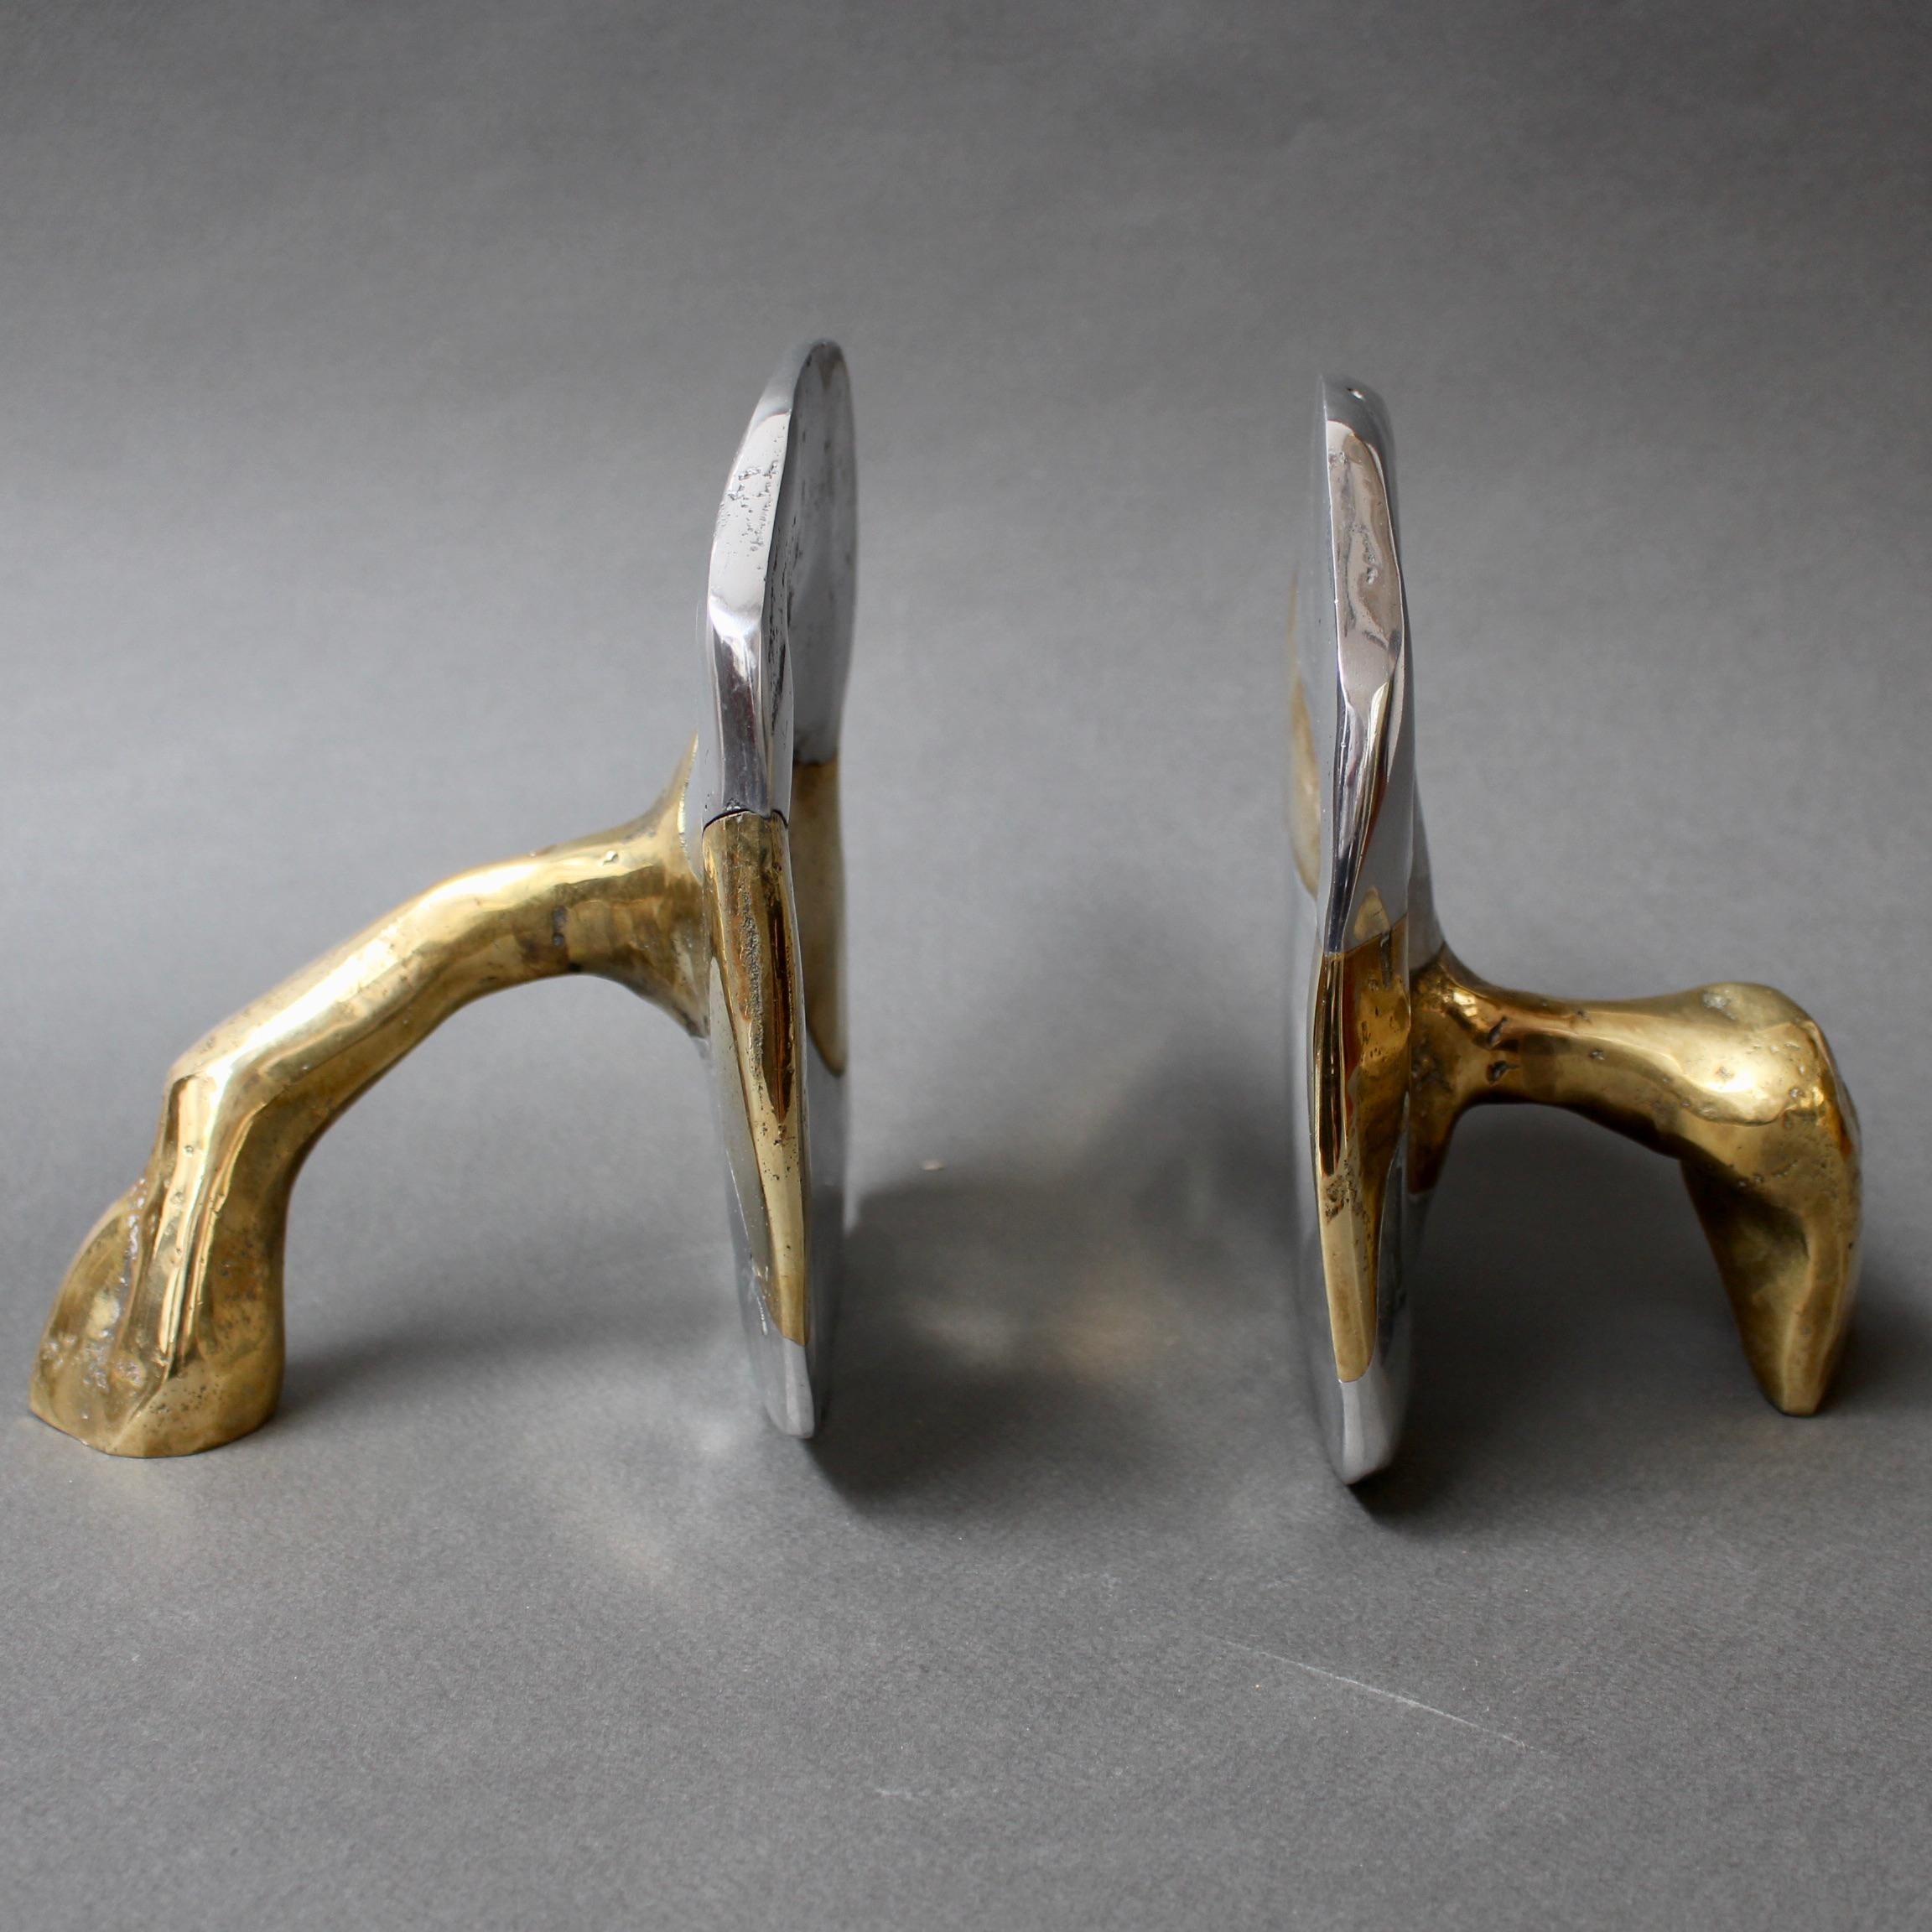 Spanish Pair of Brass and Aluminium Brutalist Style Bookends by David Marshall, c. 1980s